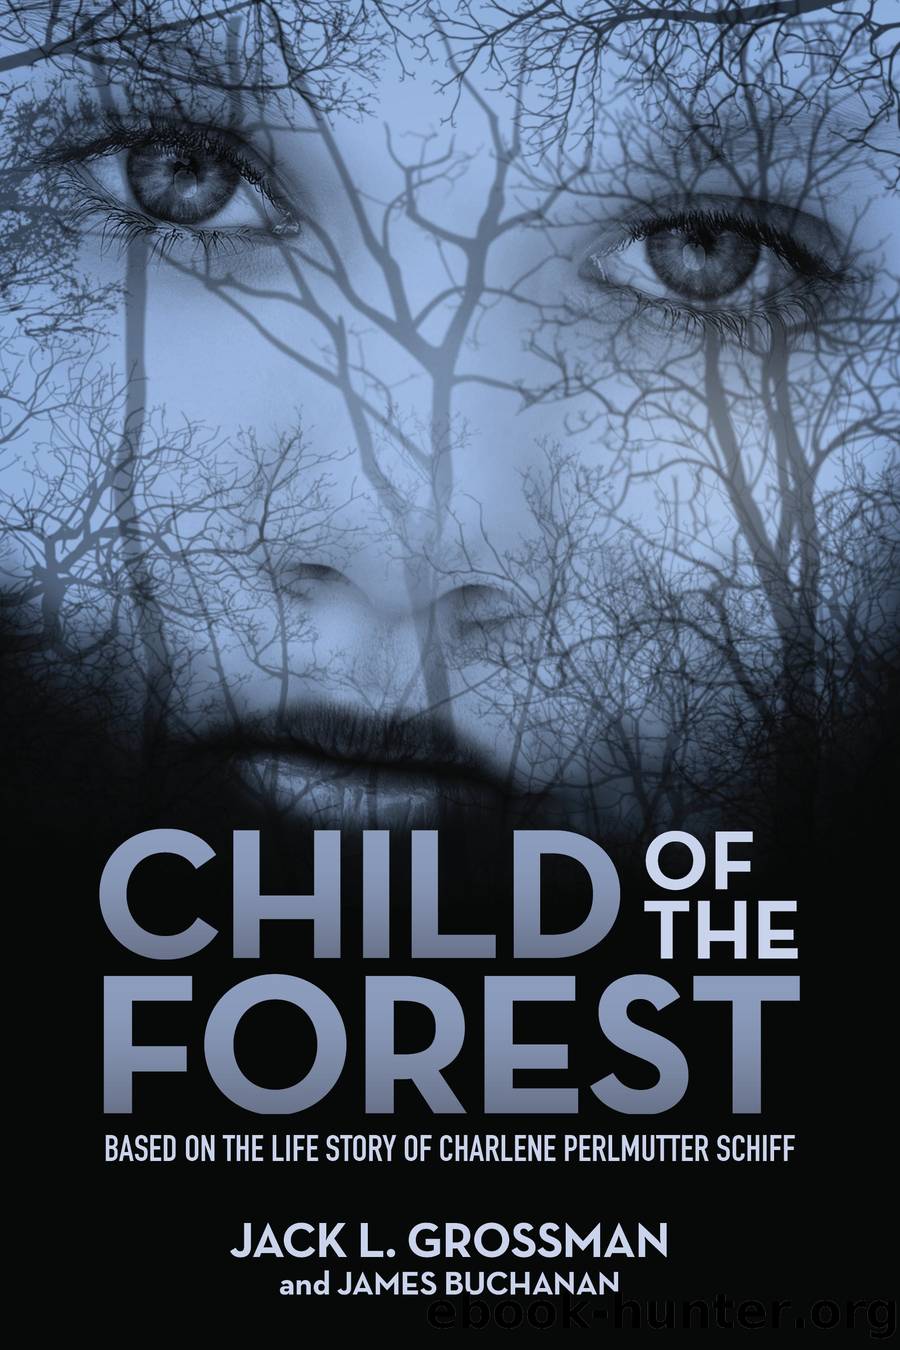 Child of the Forest: Based on the Life Story of Charlene Perlmutter Schiff by Jack Grossman and James Buchanan